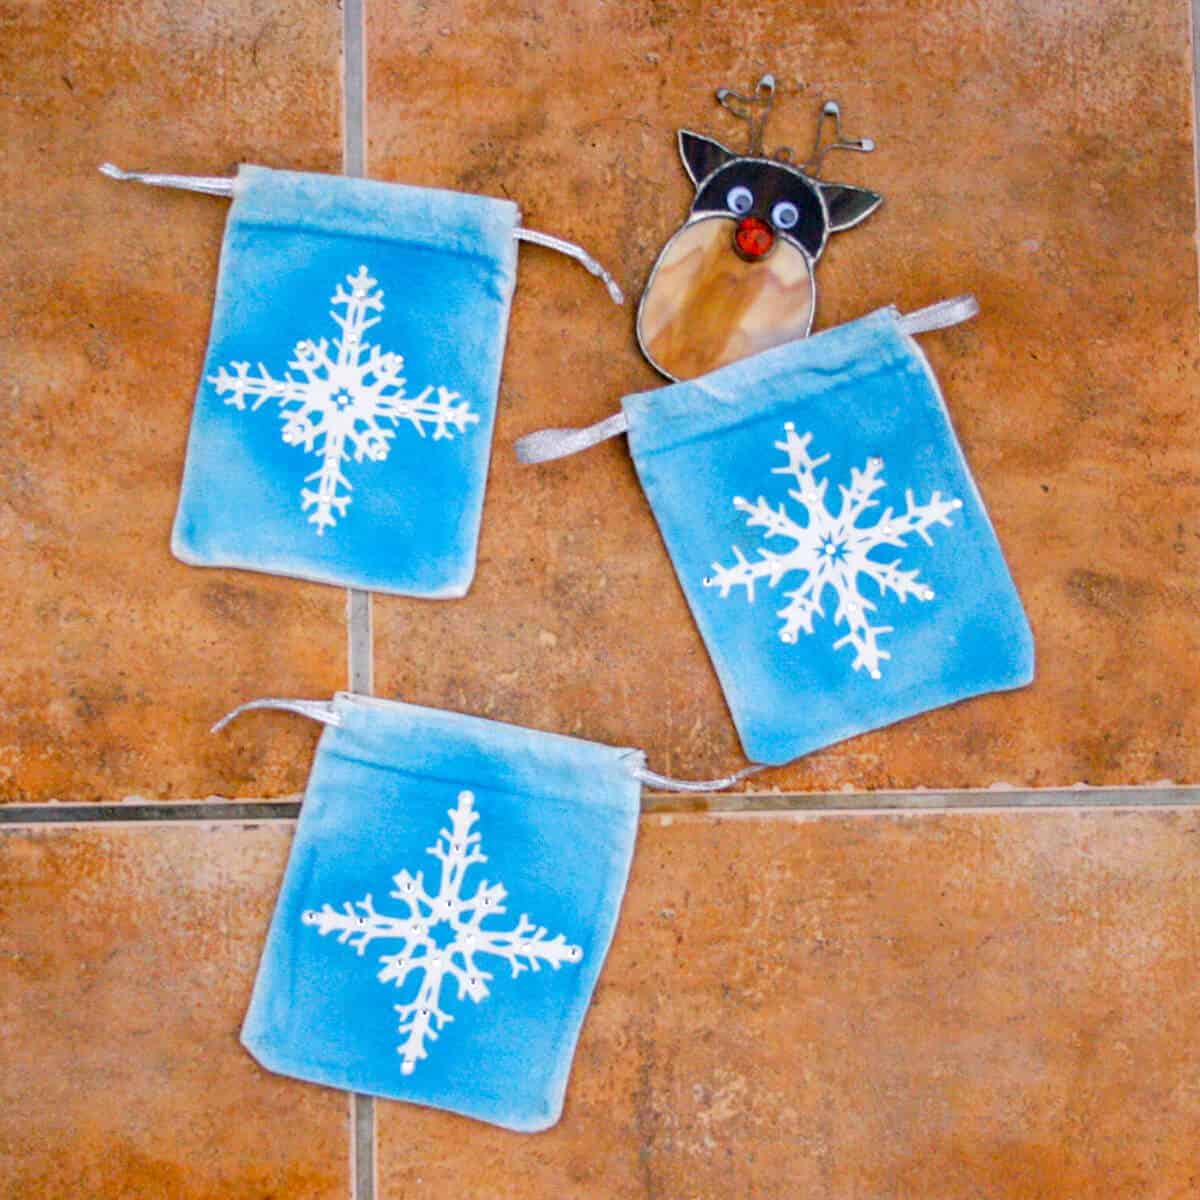 Snowflake Themed Gift Pouch Art Idea For Kids